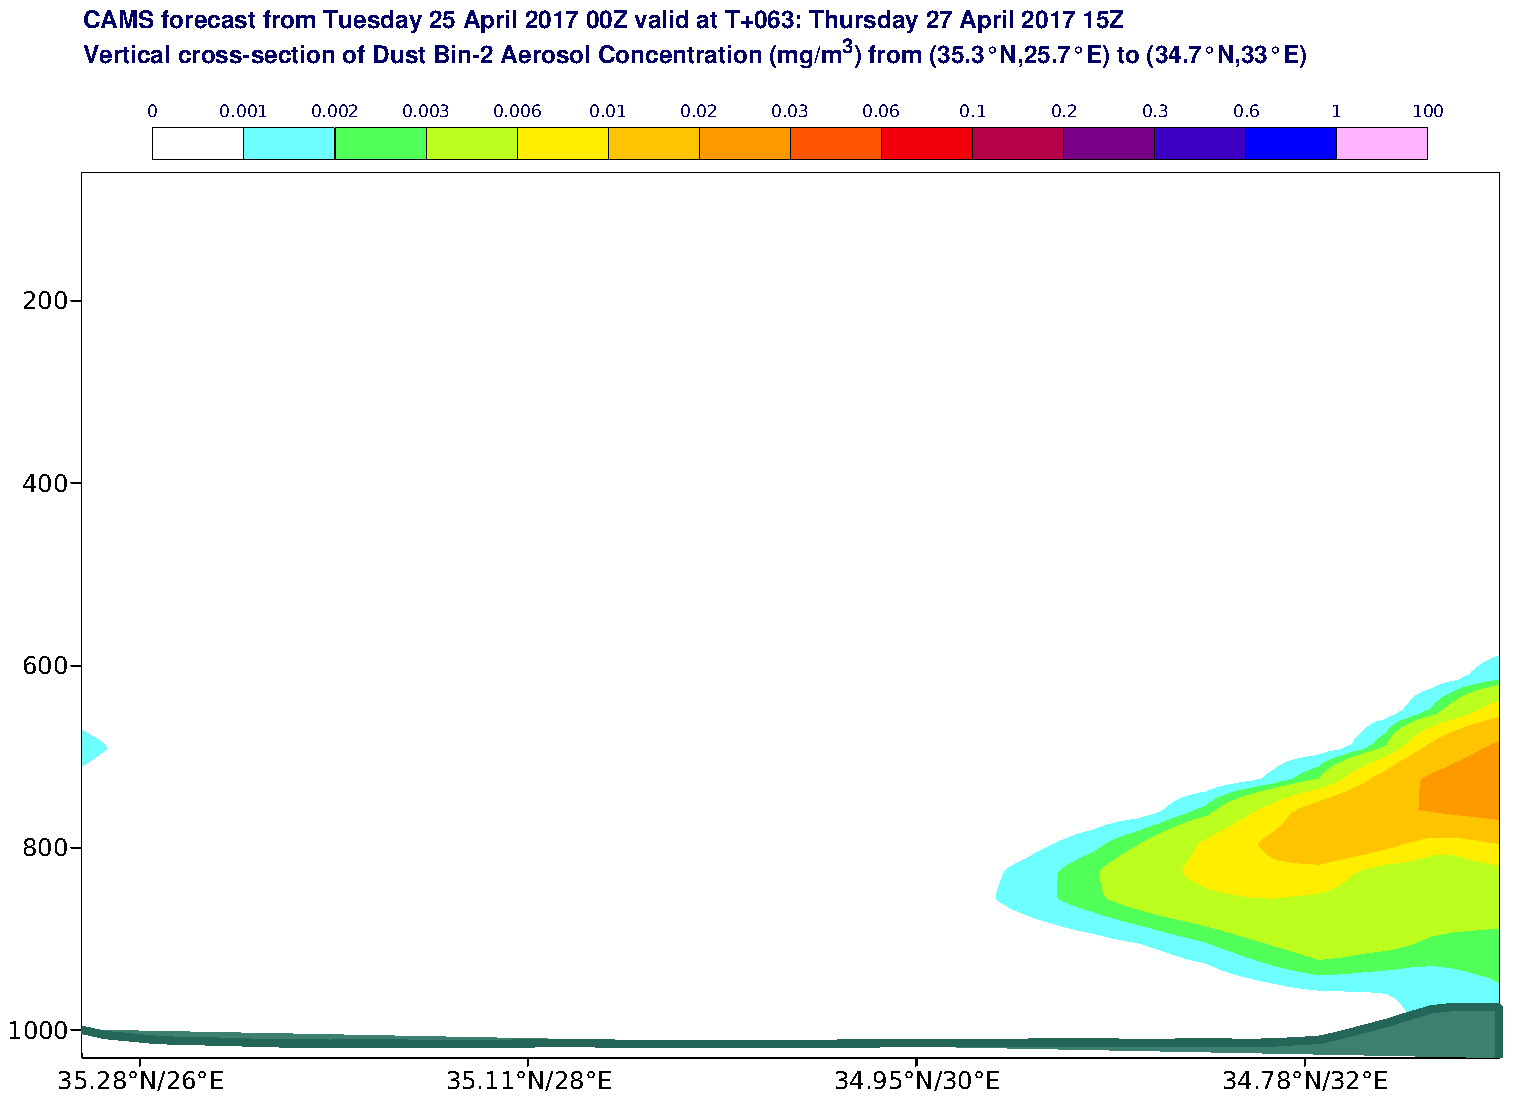 Vertical cross-section of Dust Bin-2 Aerosol Concentration (mg/m3) valid at T63 - 2017-04-27 15:00